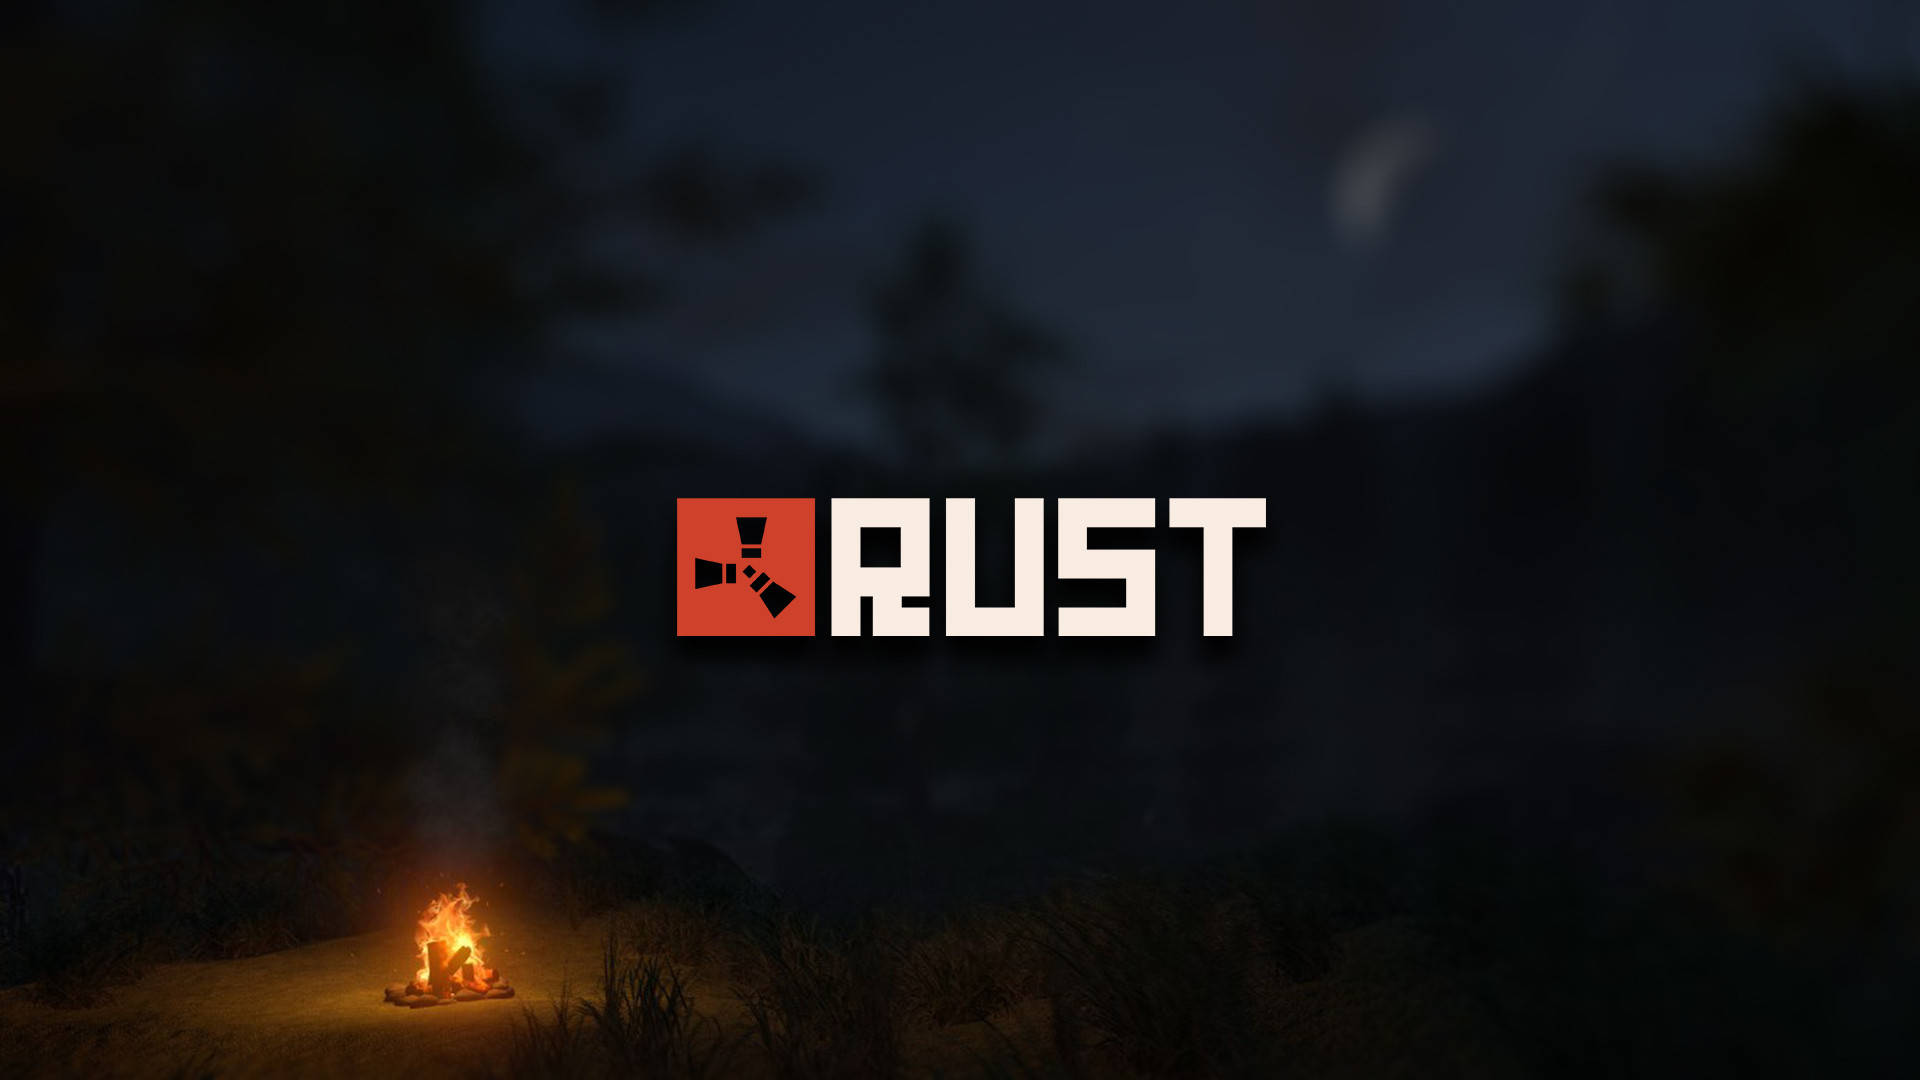 Highlighting The Rust Logo - A Glowing Campfire Theme Background